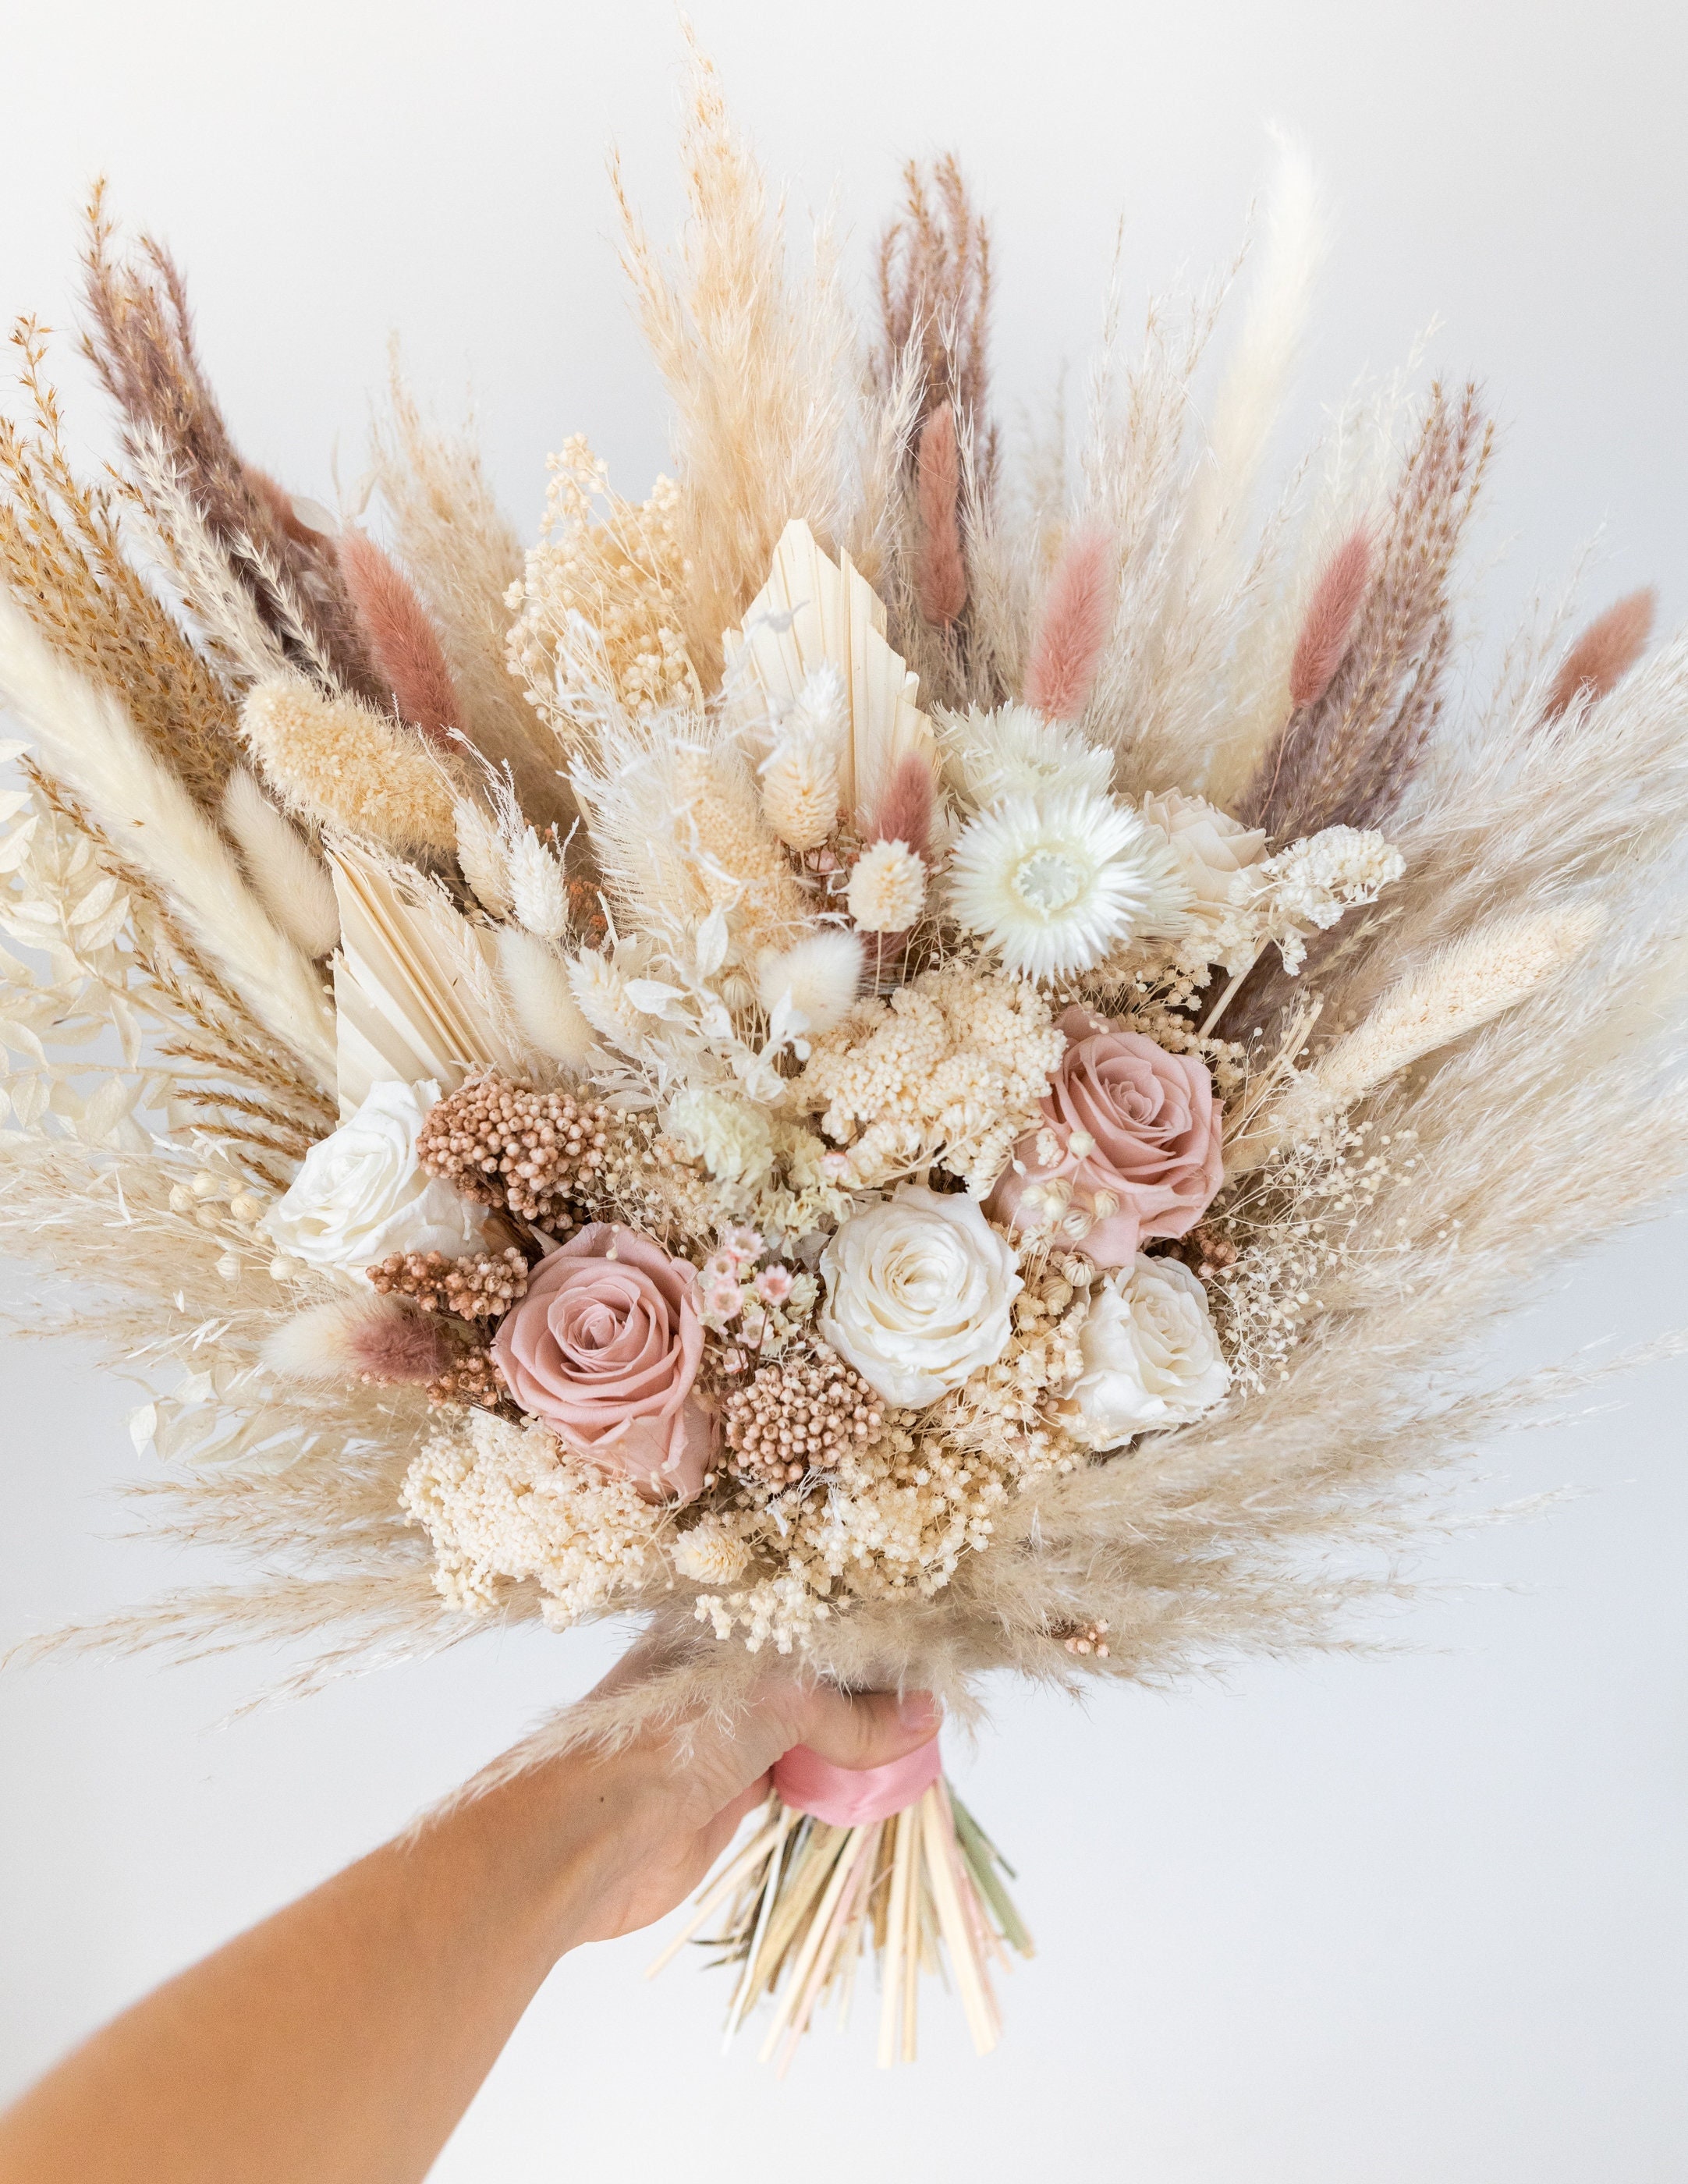 Dried Flowers Bouquet. Dried Plants Pink